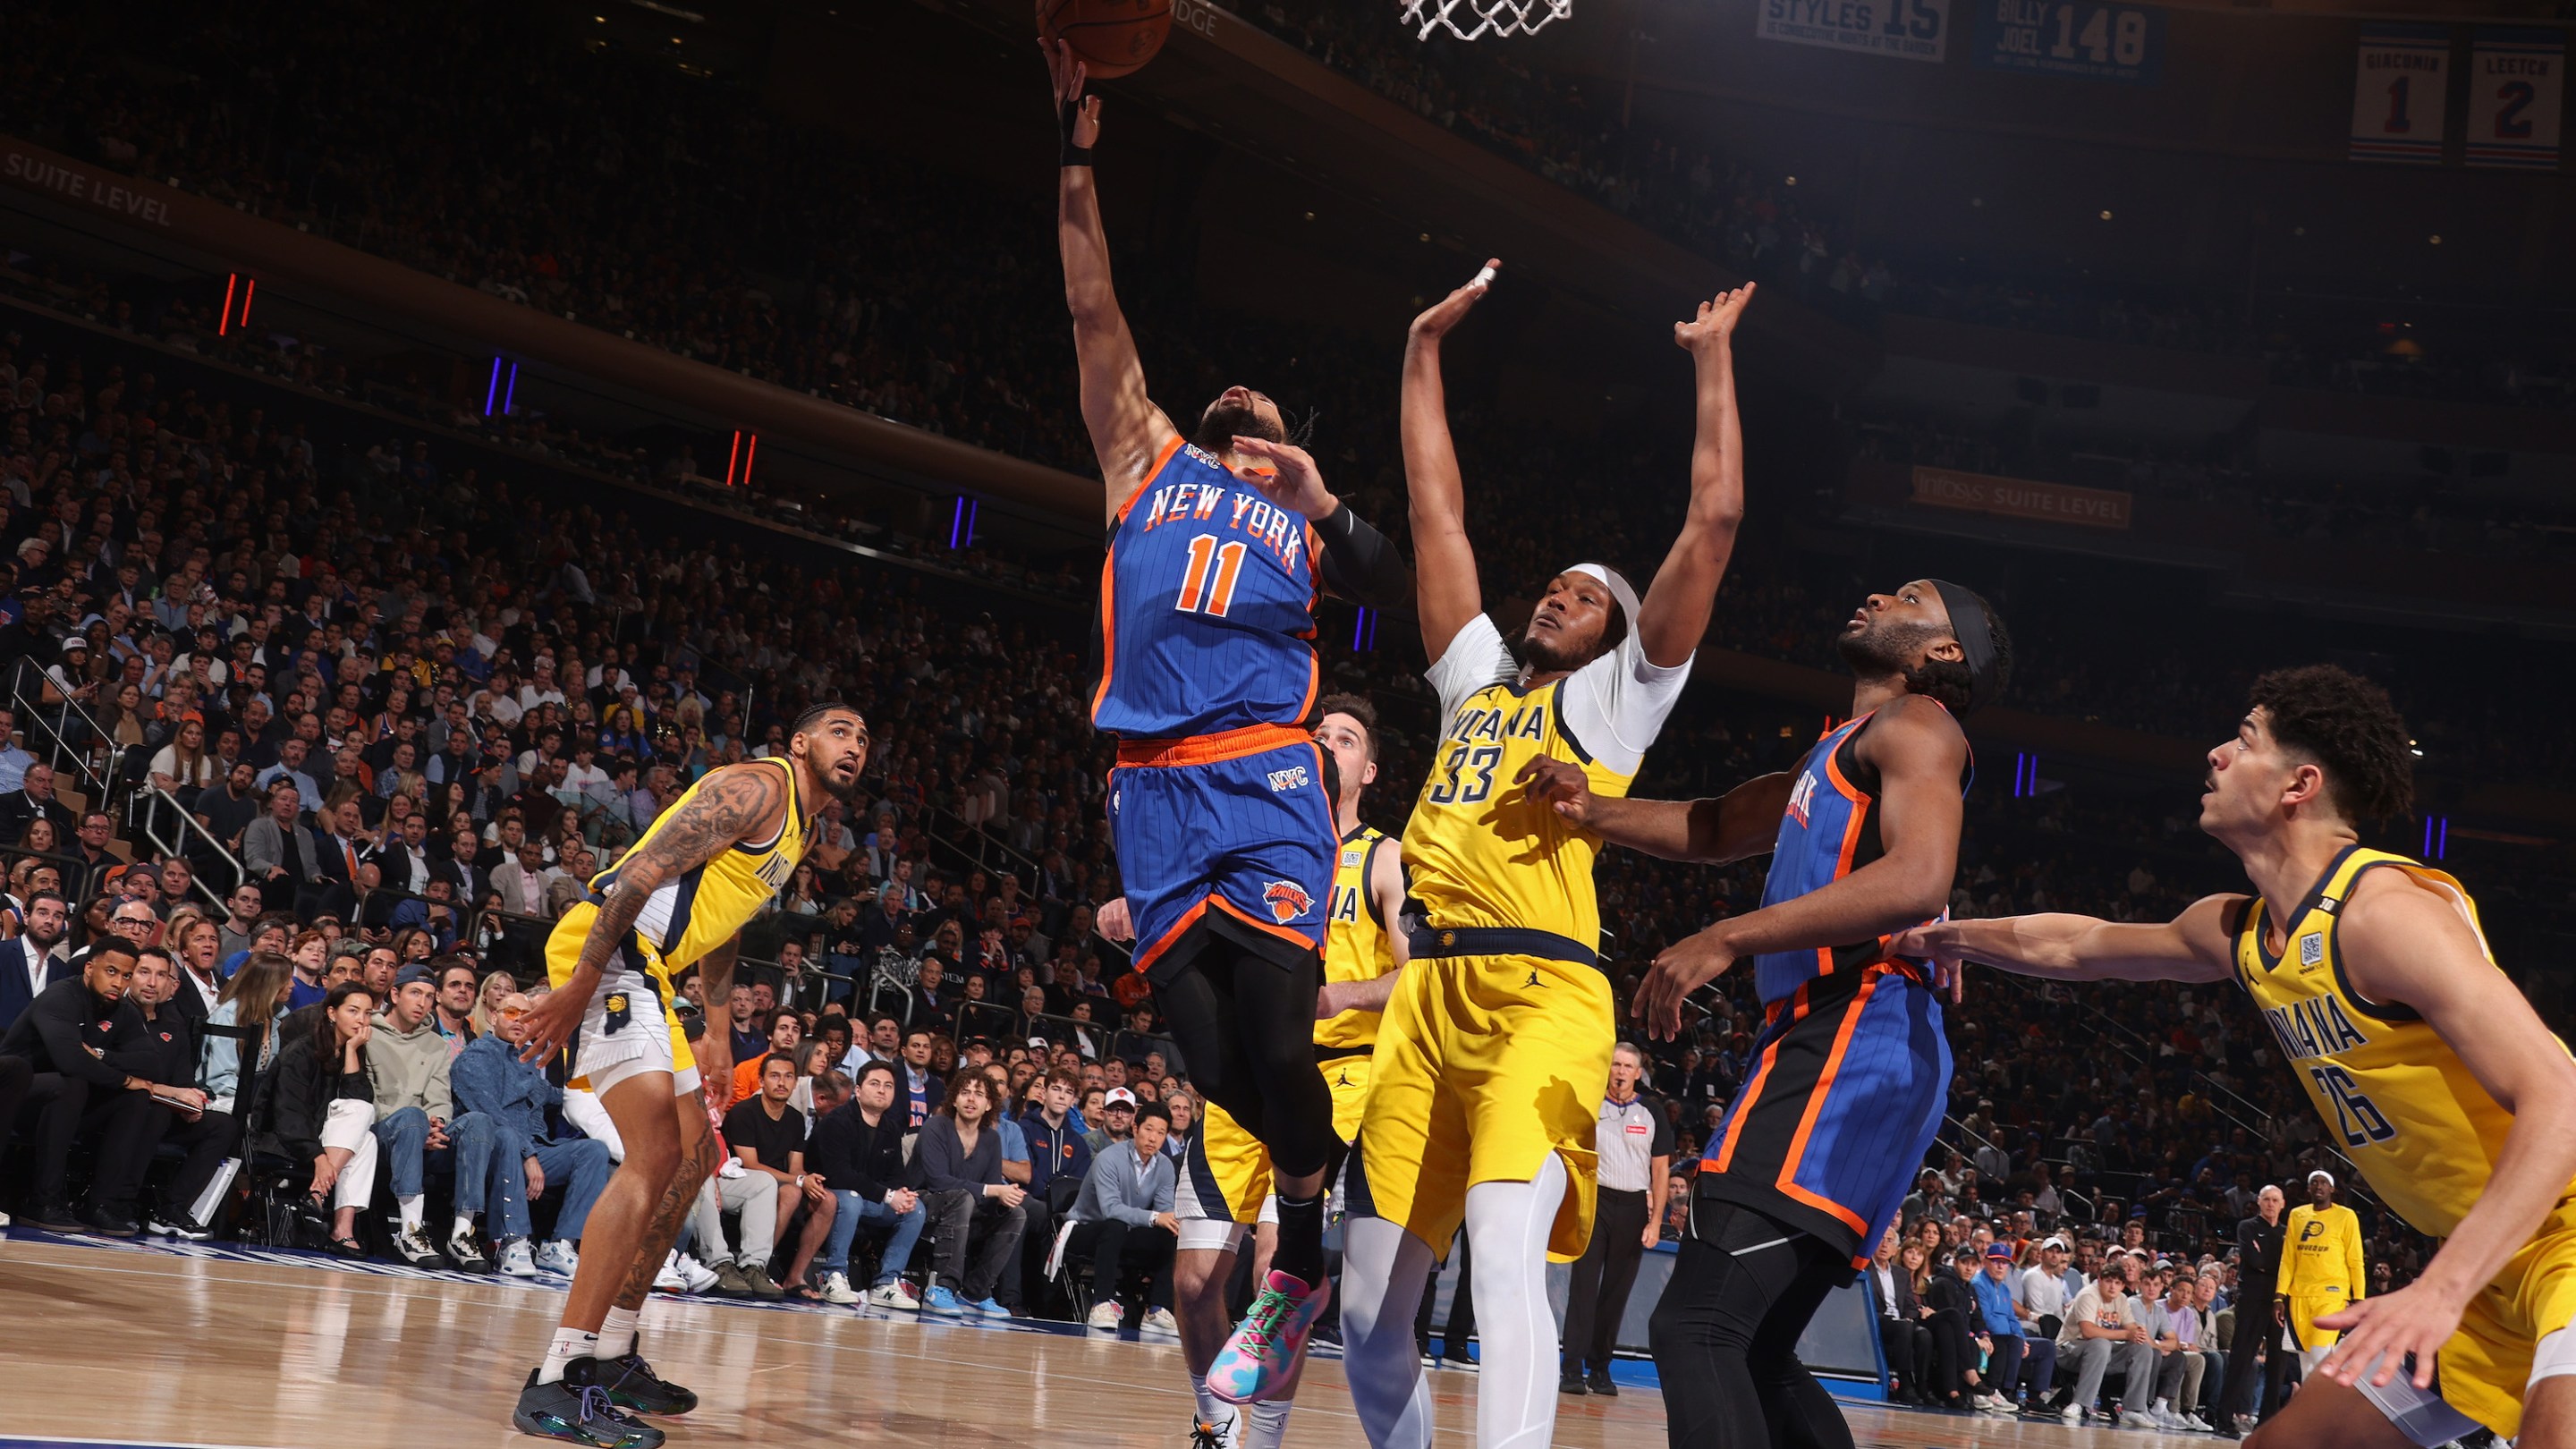 Jalen Brunson #11 of the New York Knicks shoots the ball during the game against the Indiana Pacers